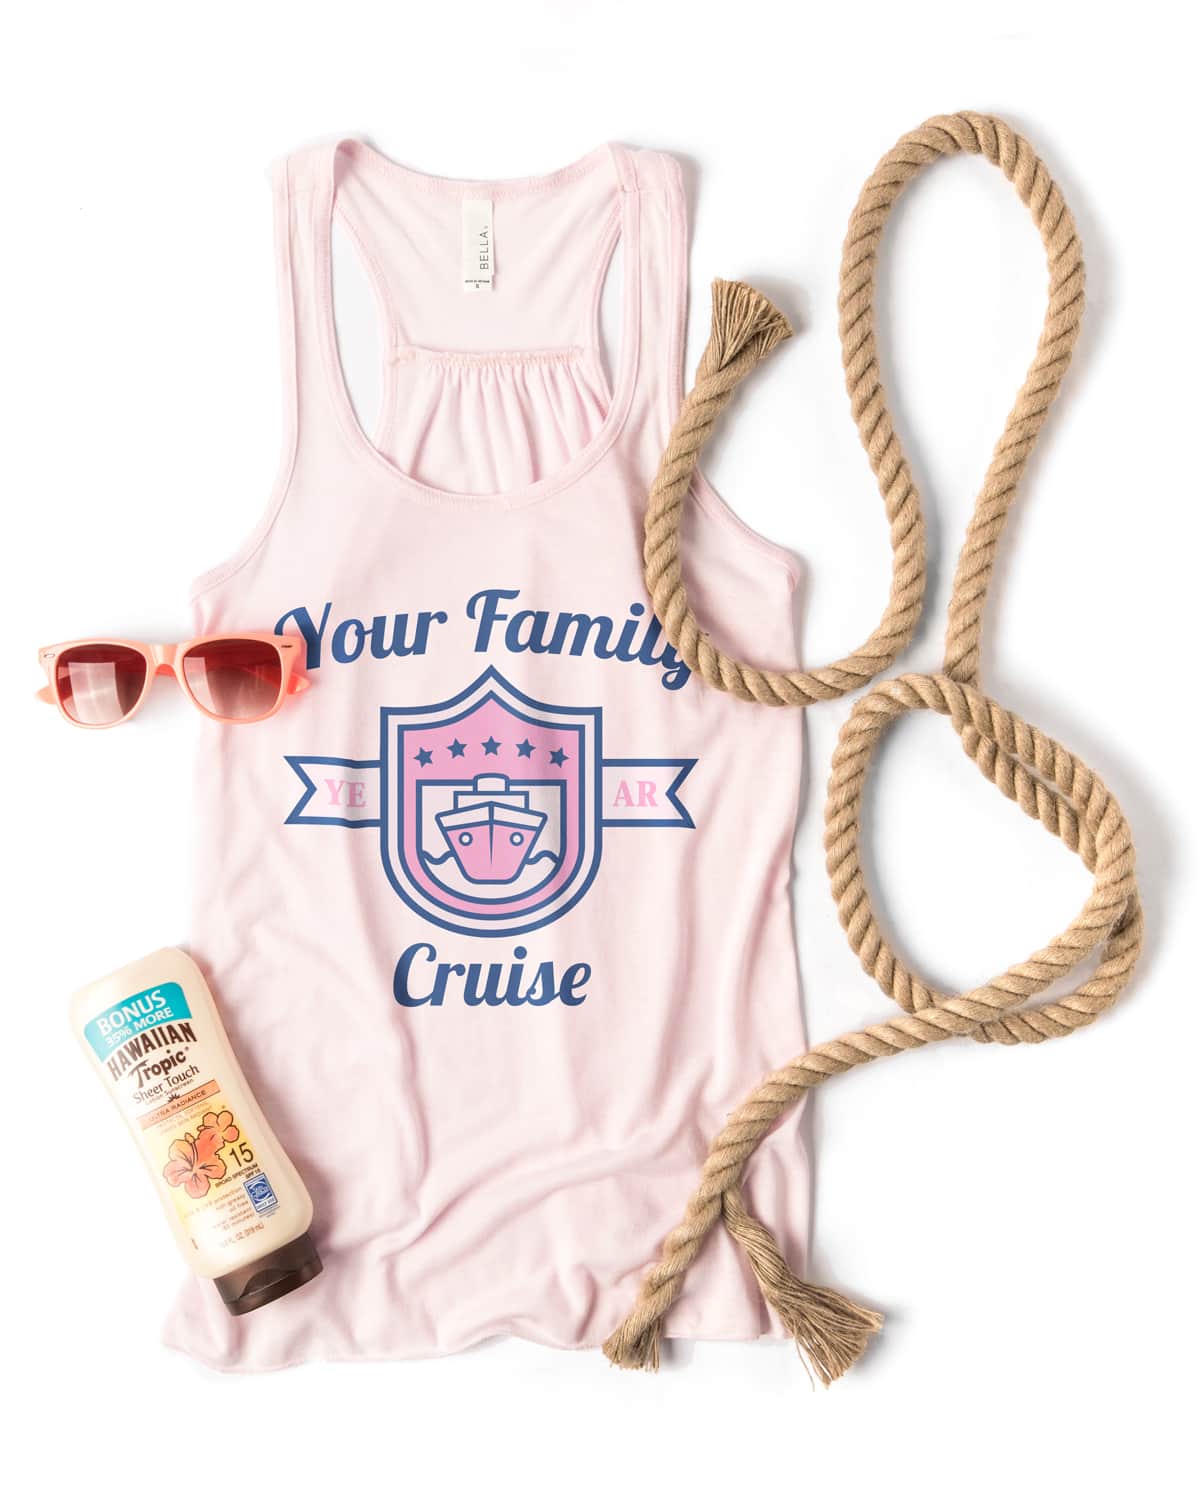 An example family vacation t-shirt design that's cruise themed.